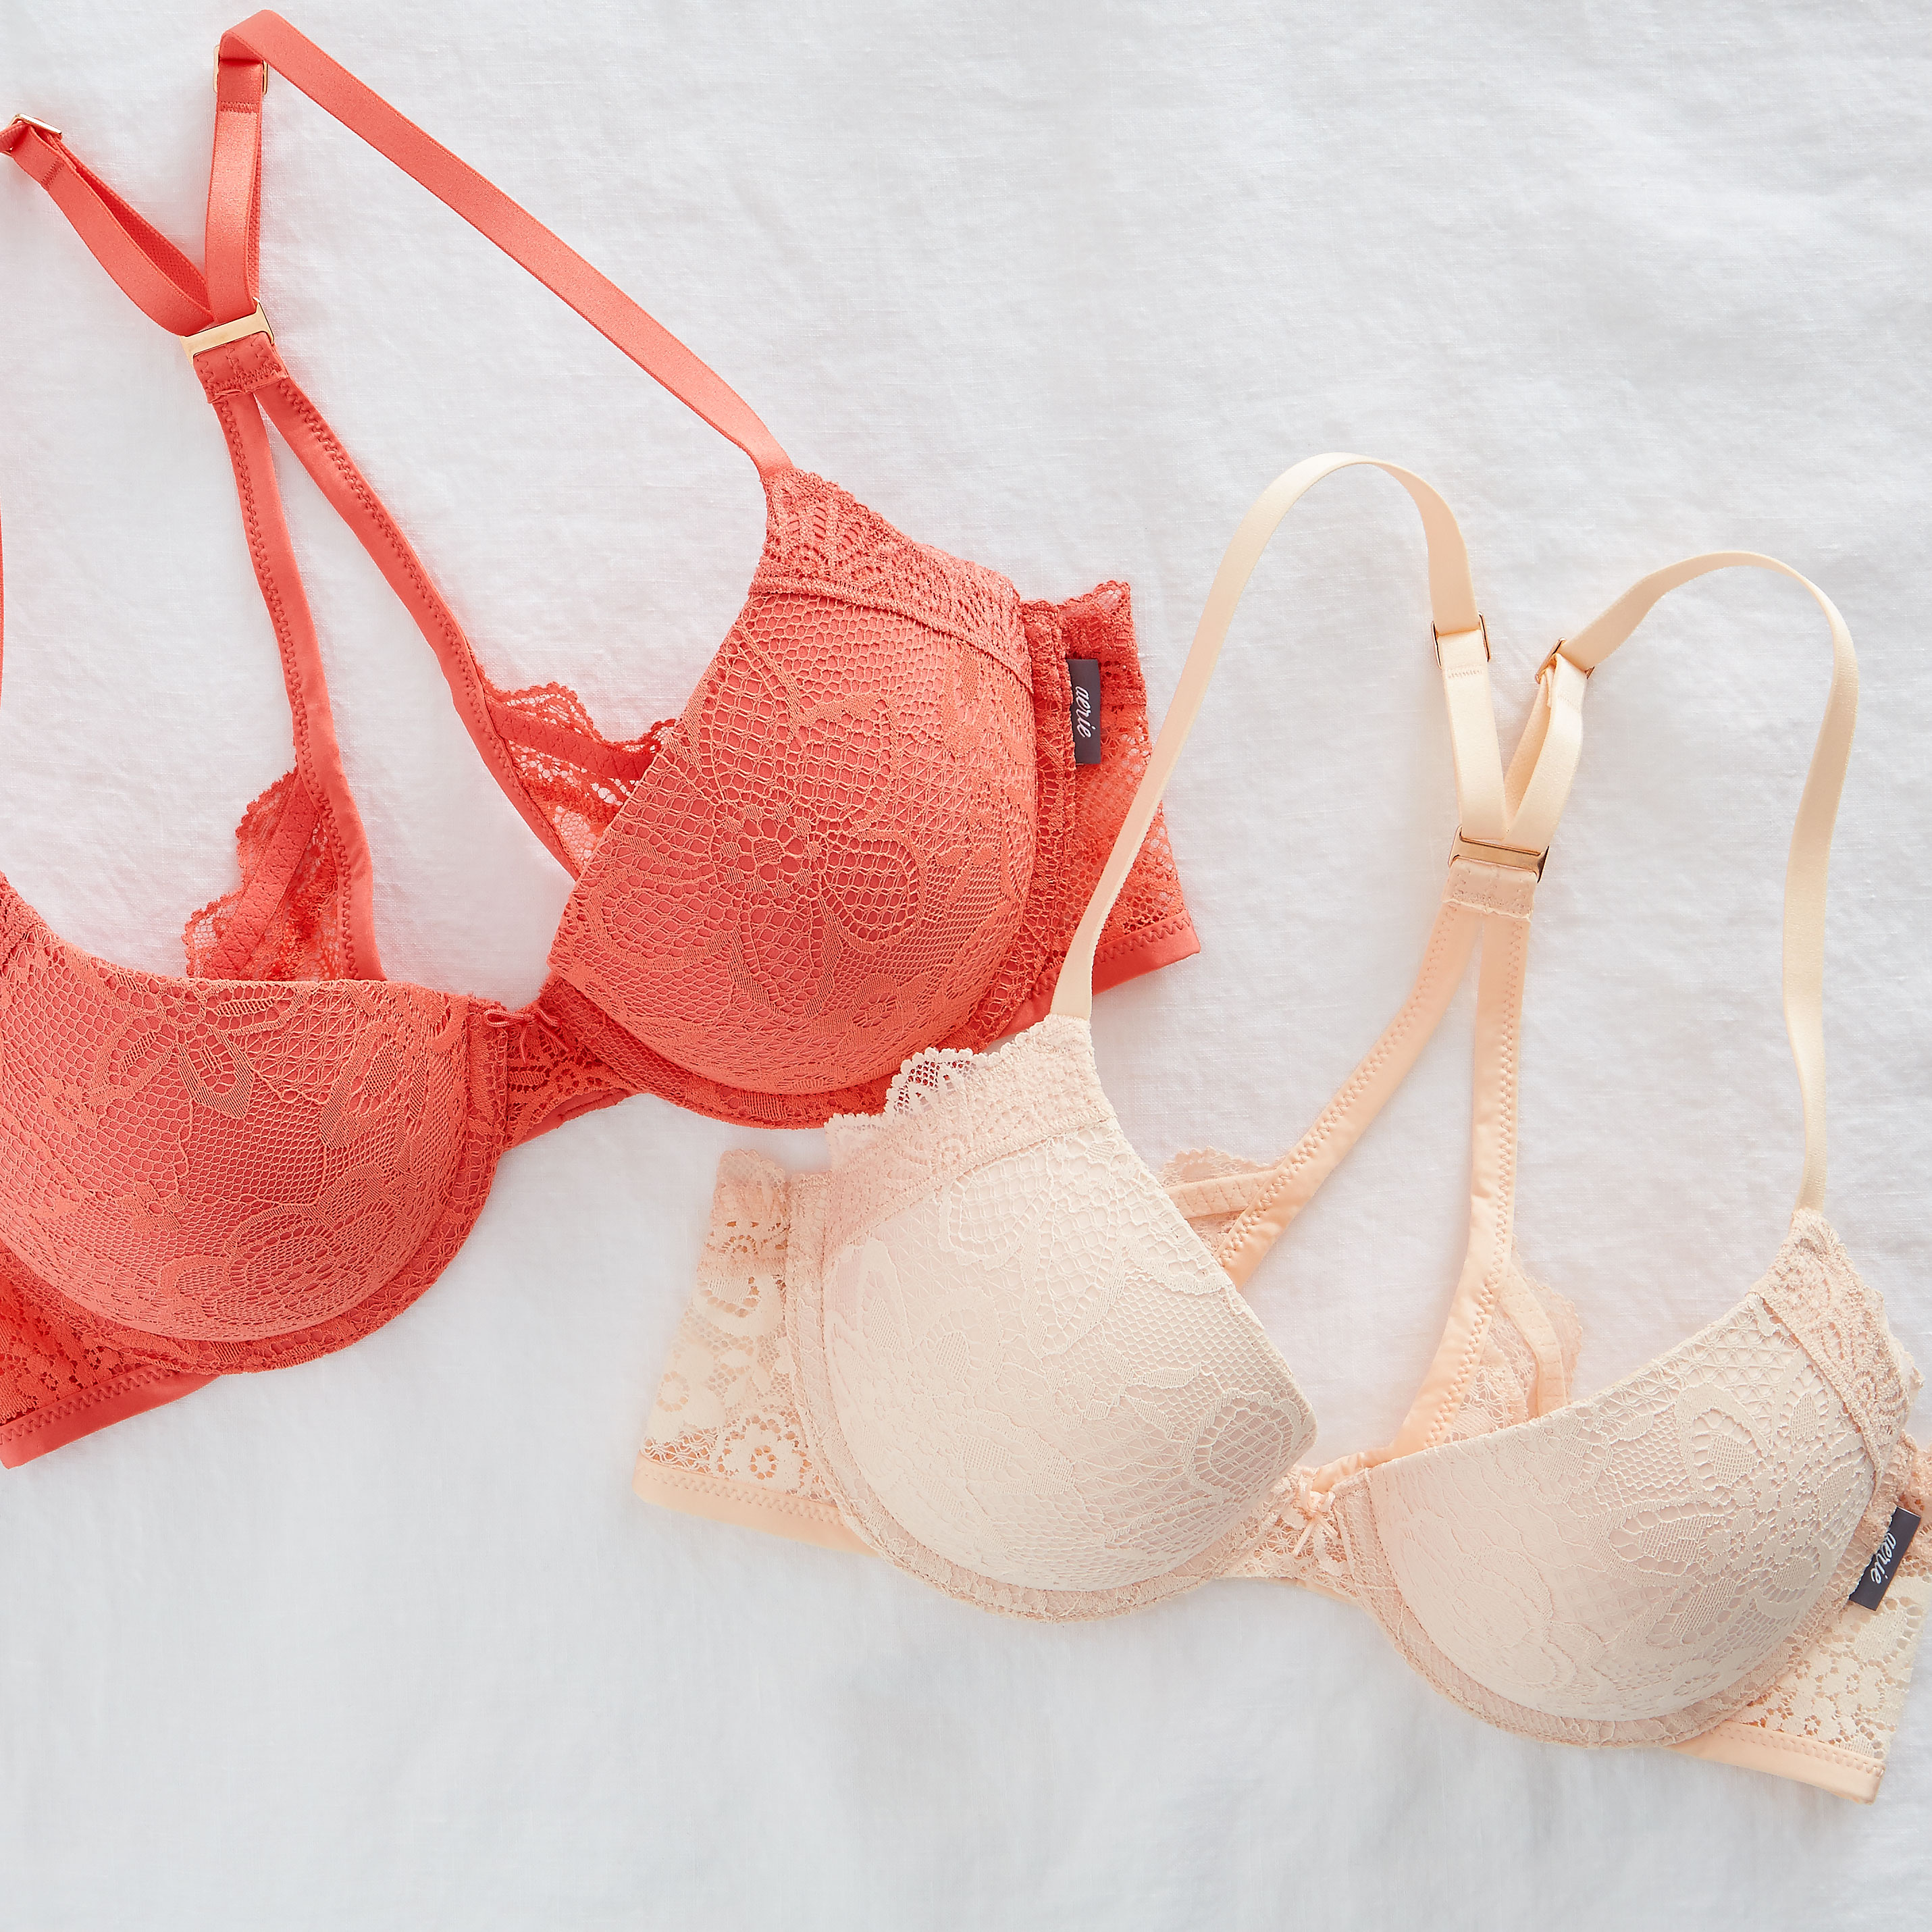 NEW Day To Play Bras - #AerieREAL Life